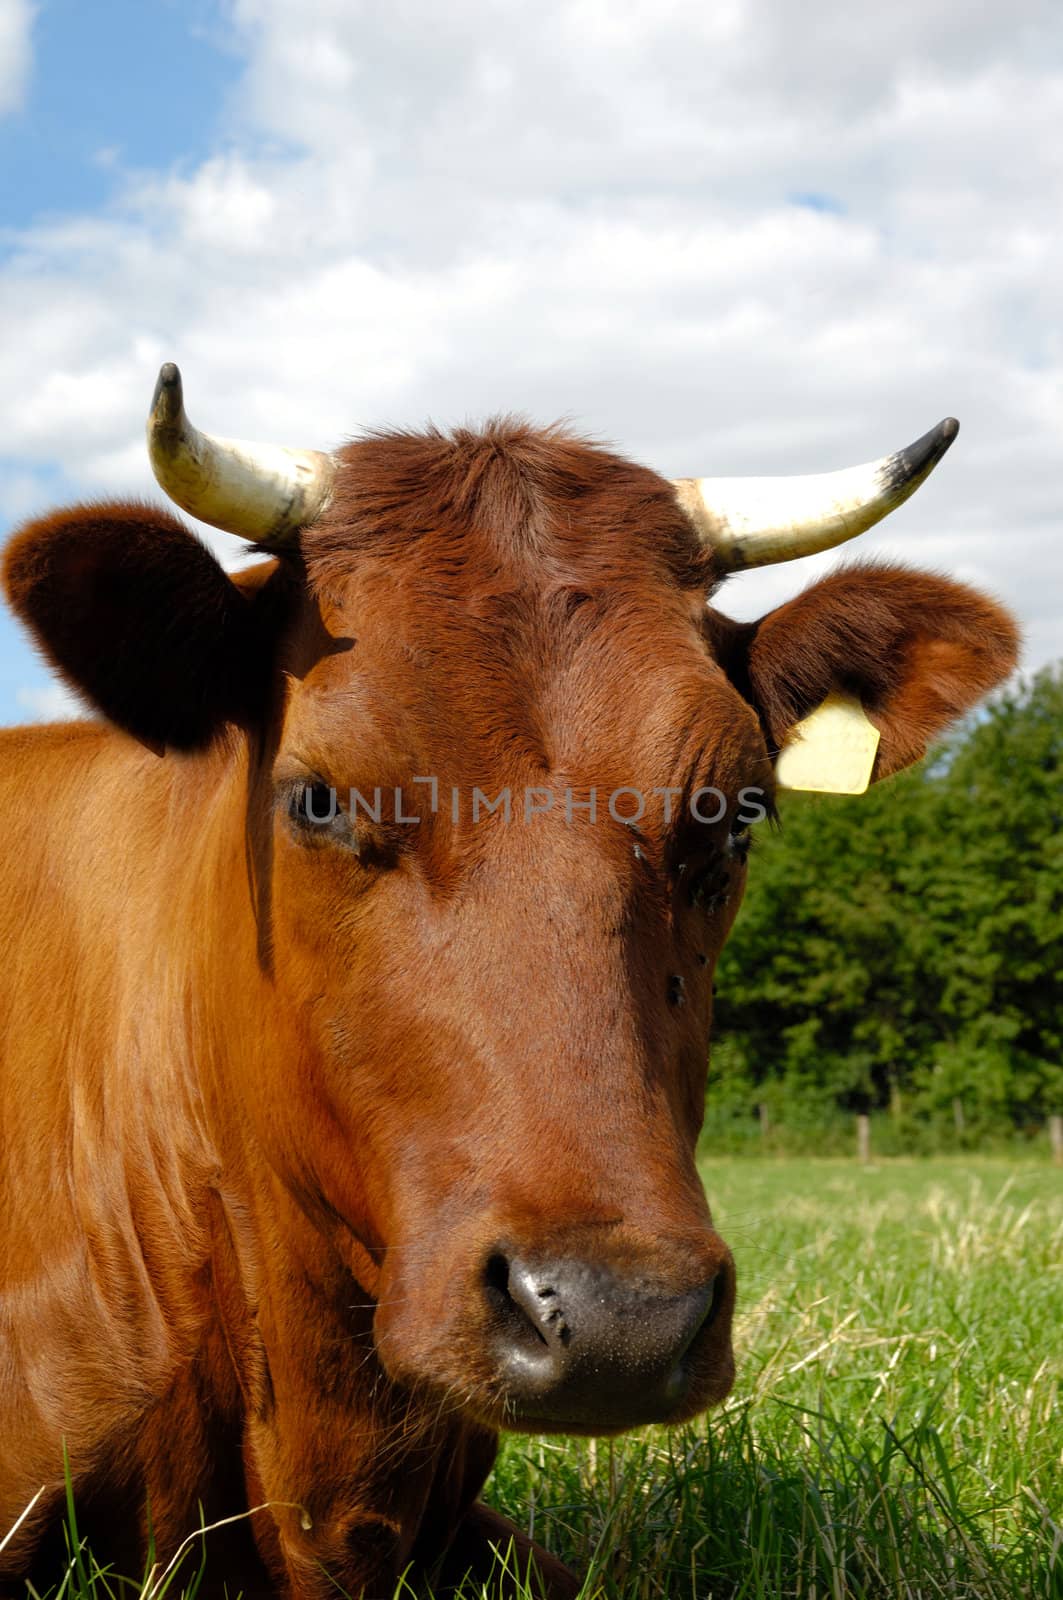 Sweet cow resting on a green field. Close-up.